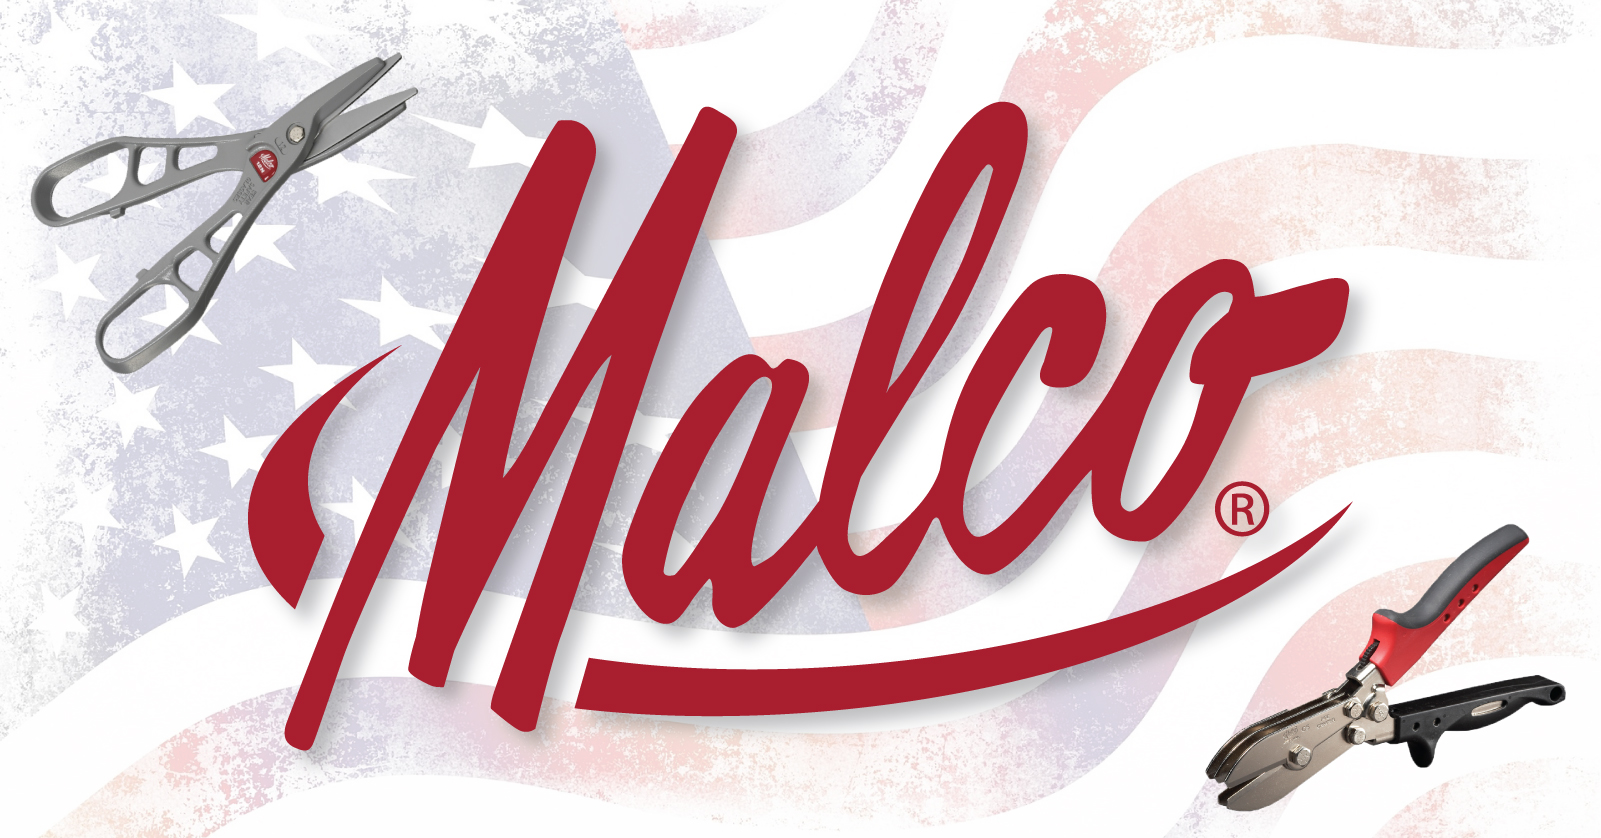 Malco logo with American flag and two hand tools 